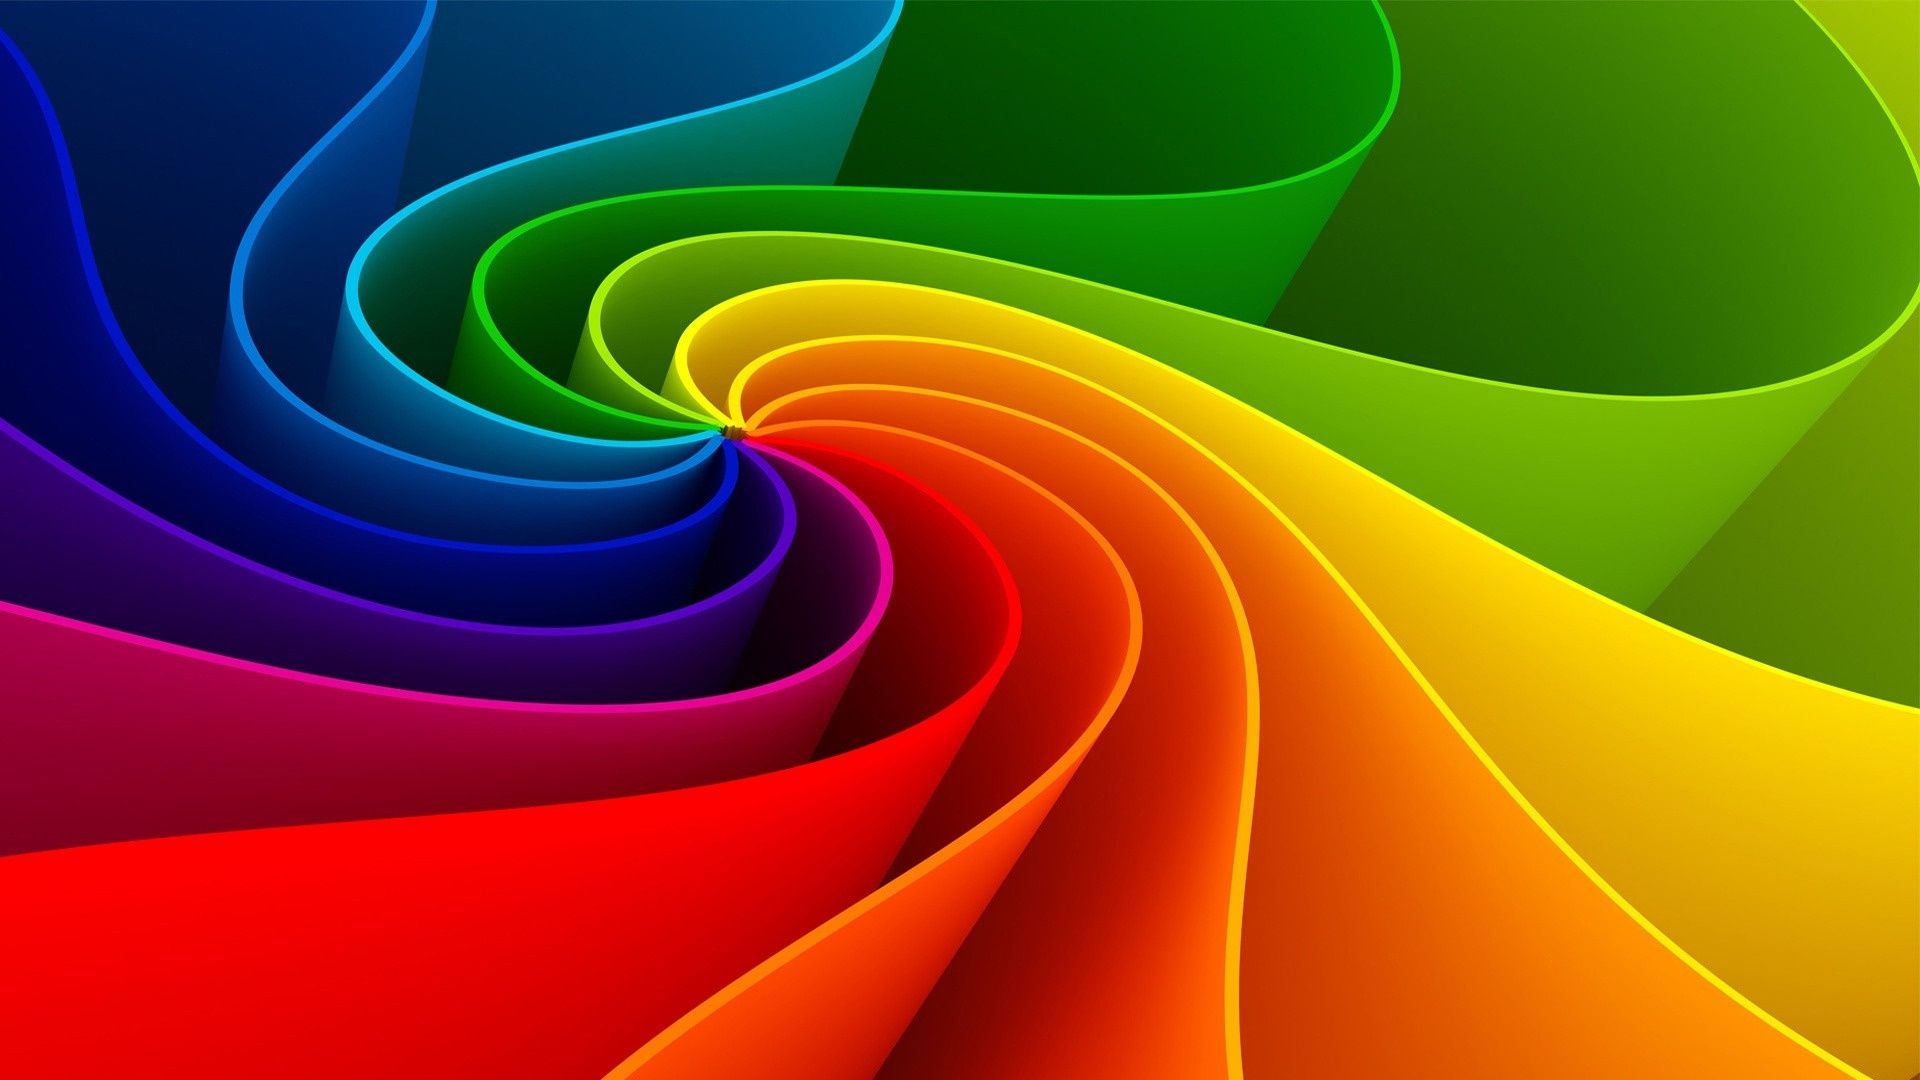 3D Abstract Rainbow Backgrounds